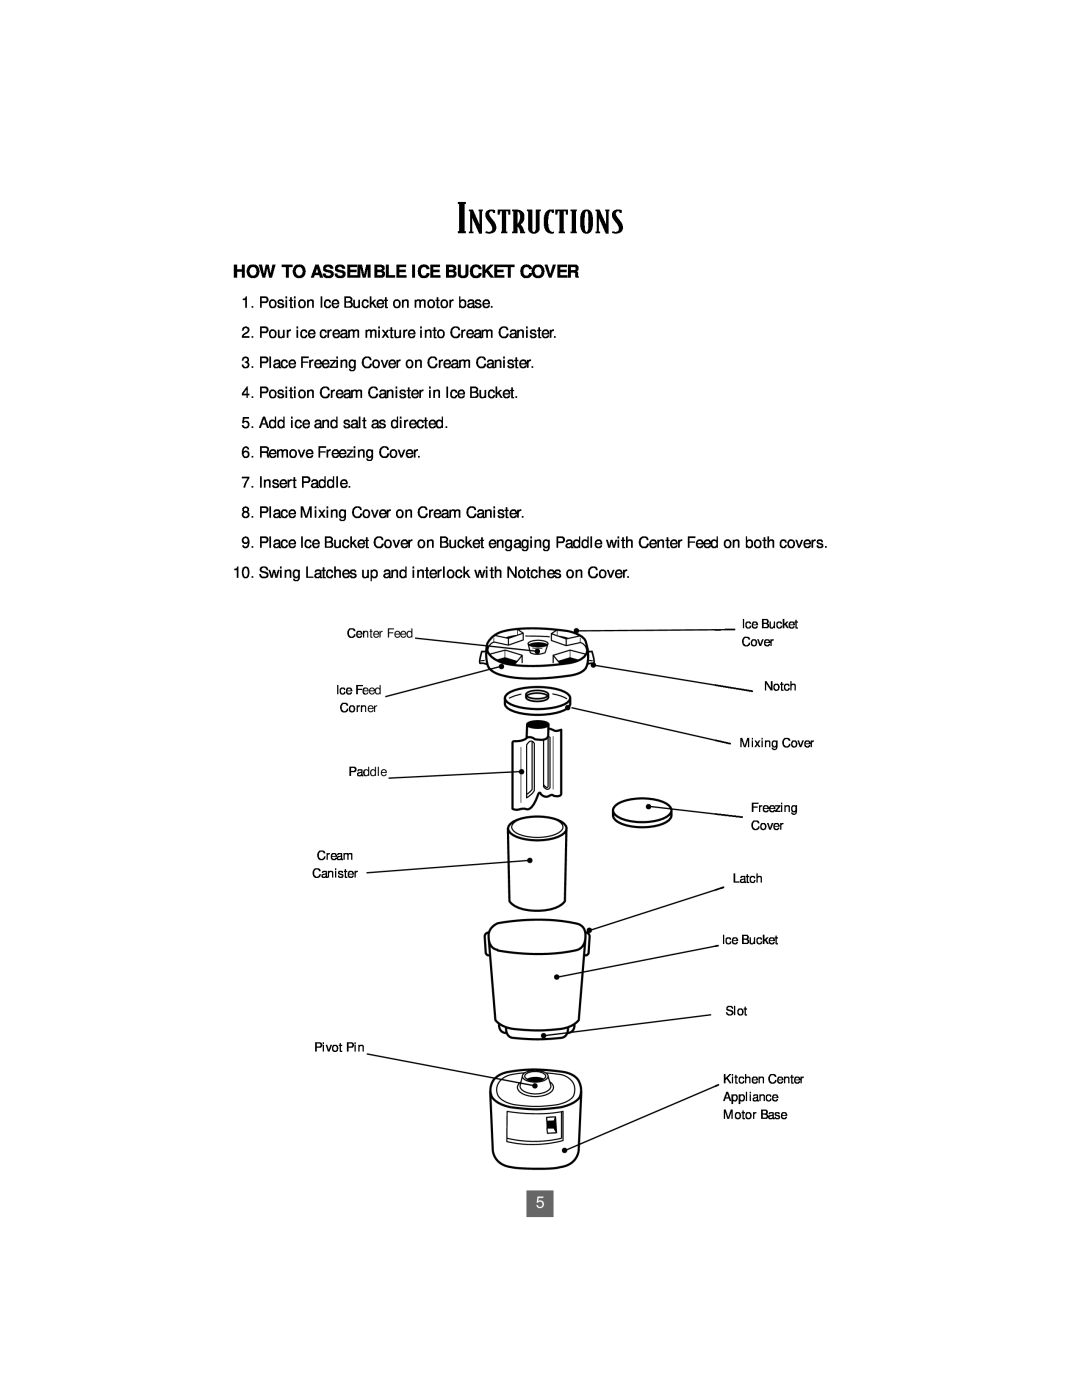 Sunbeam 4744 instruction manual Instructions, How To Assemble Ice Bucket Cover 